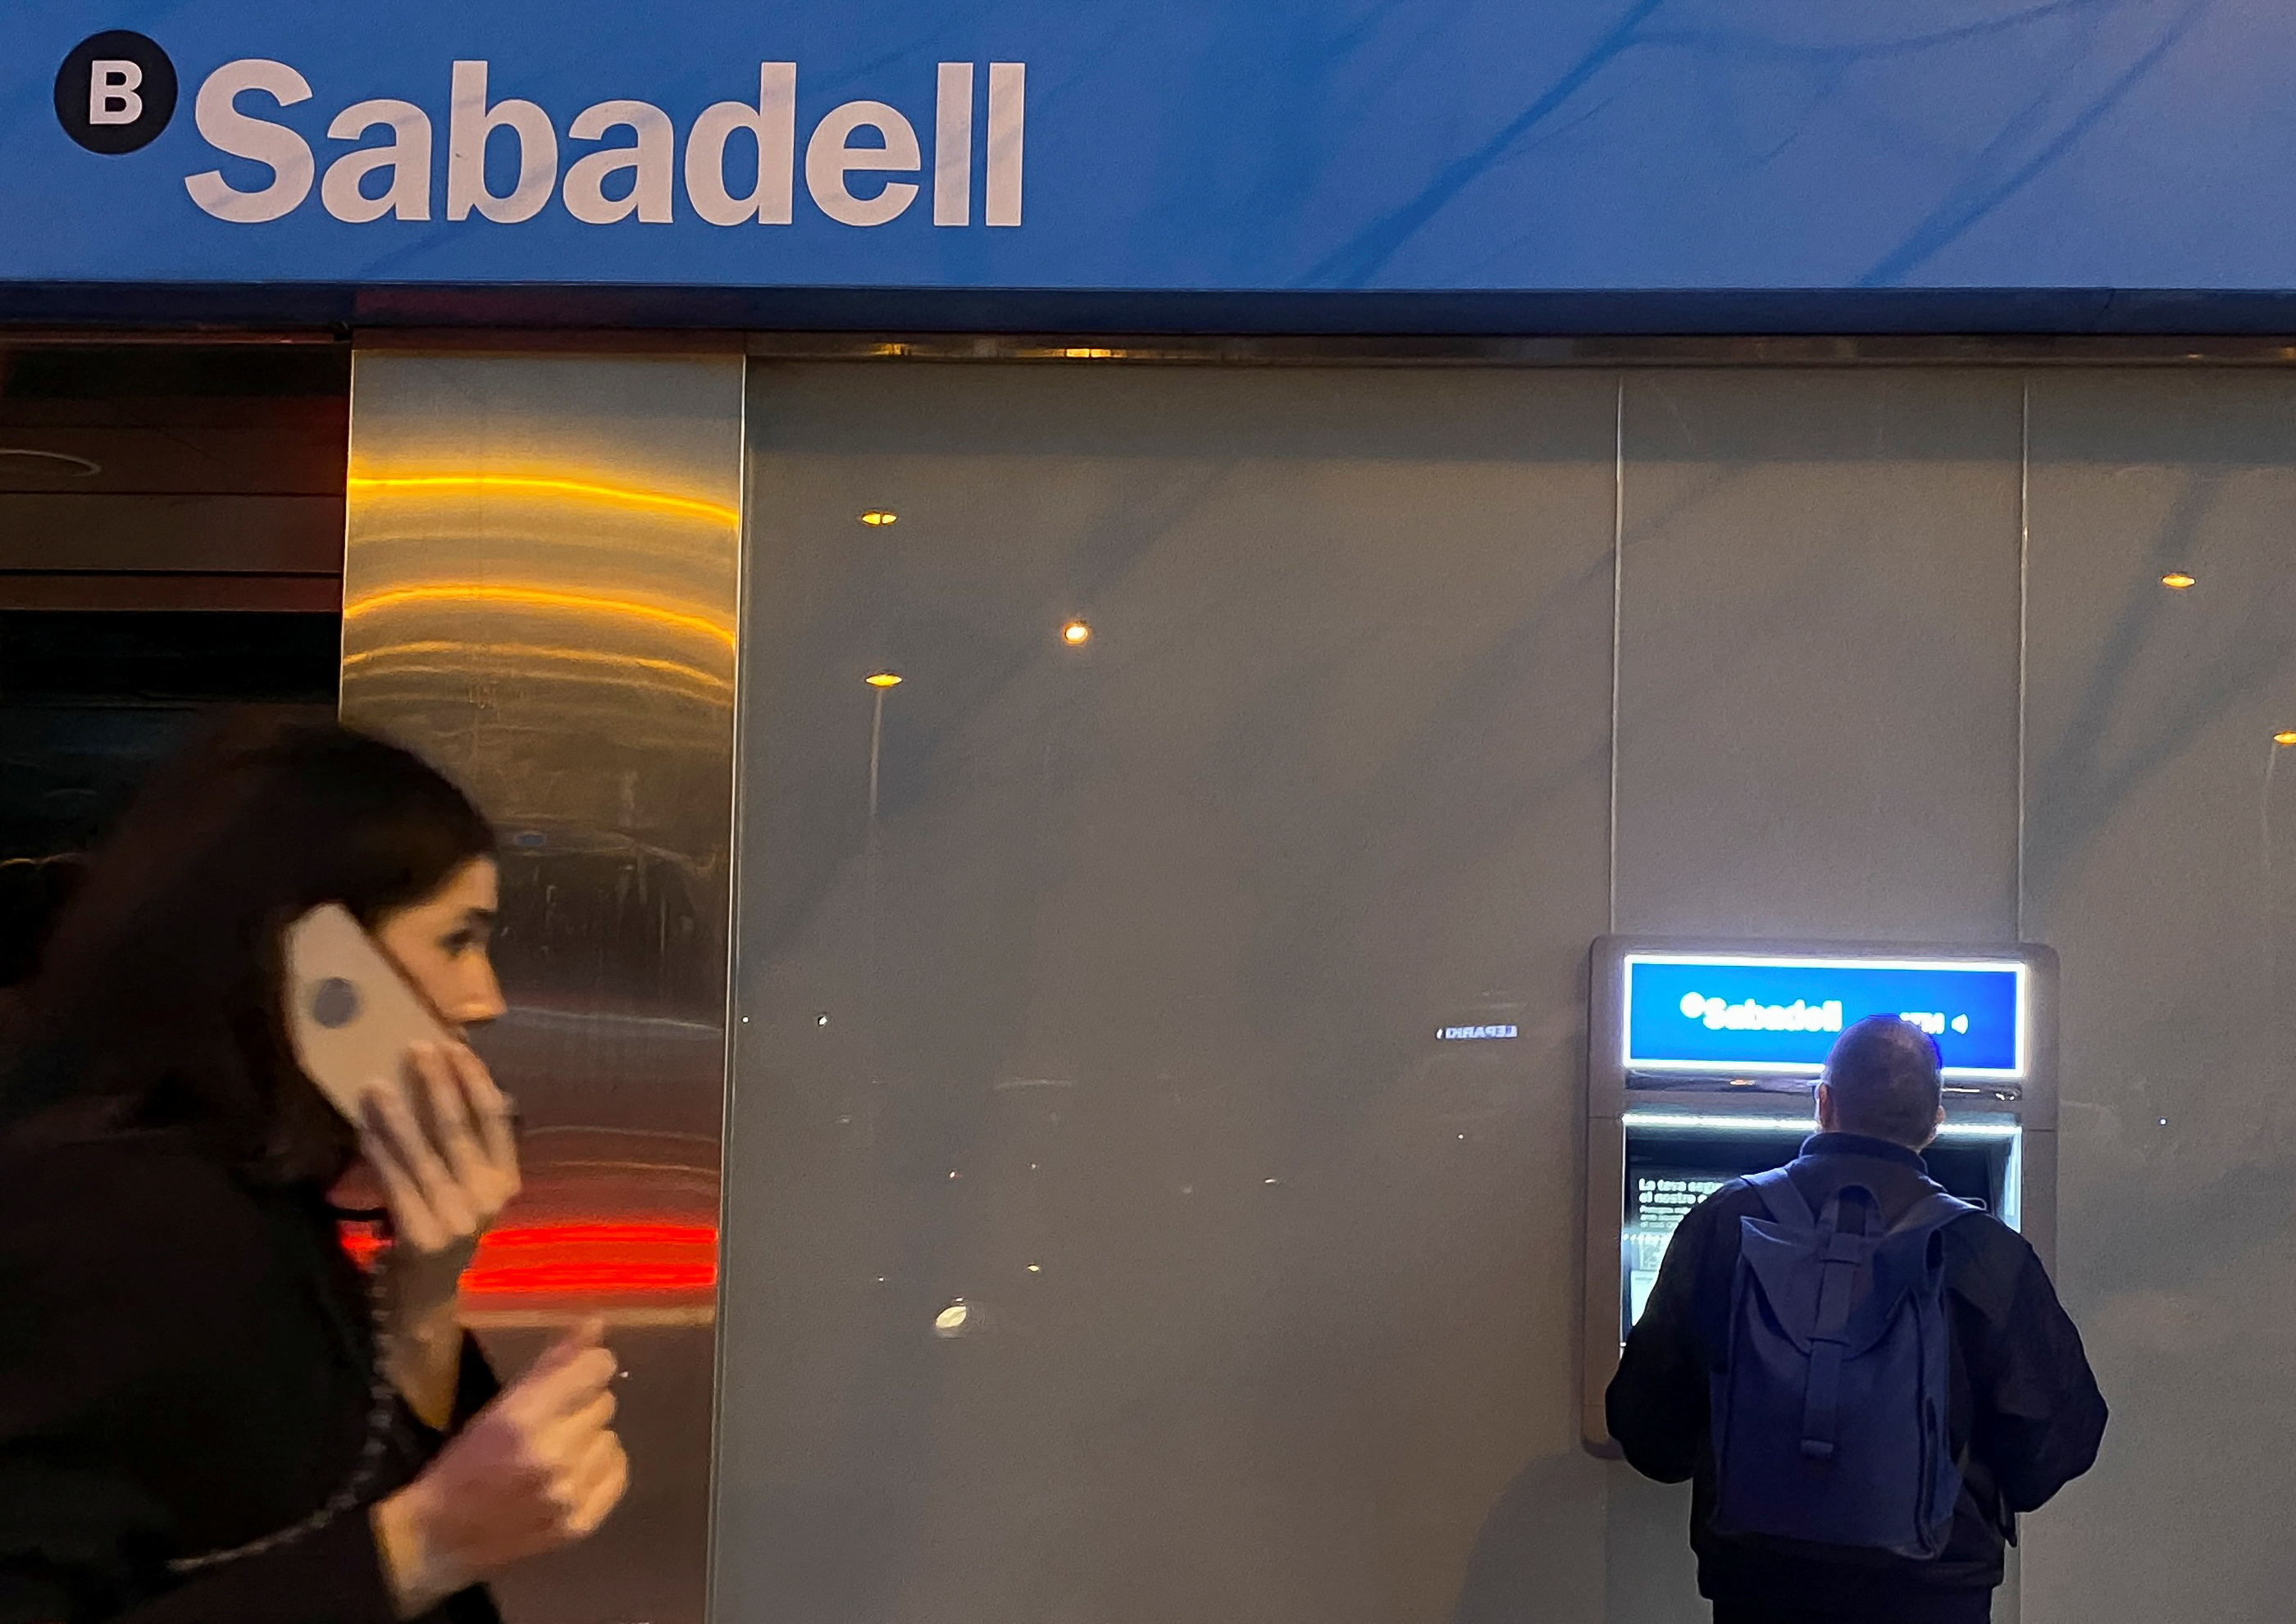 A man uses an ATM at Sabadell bank office in Barcelona